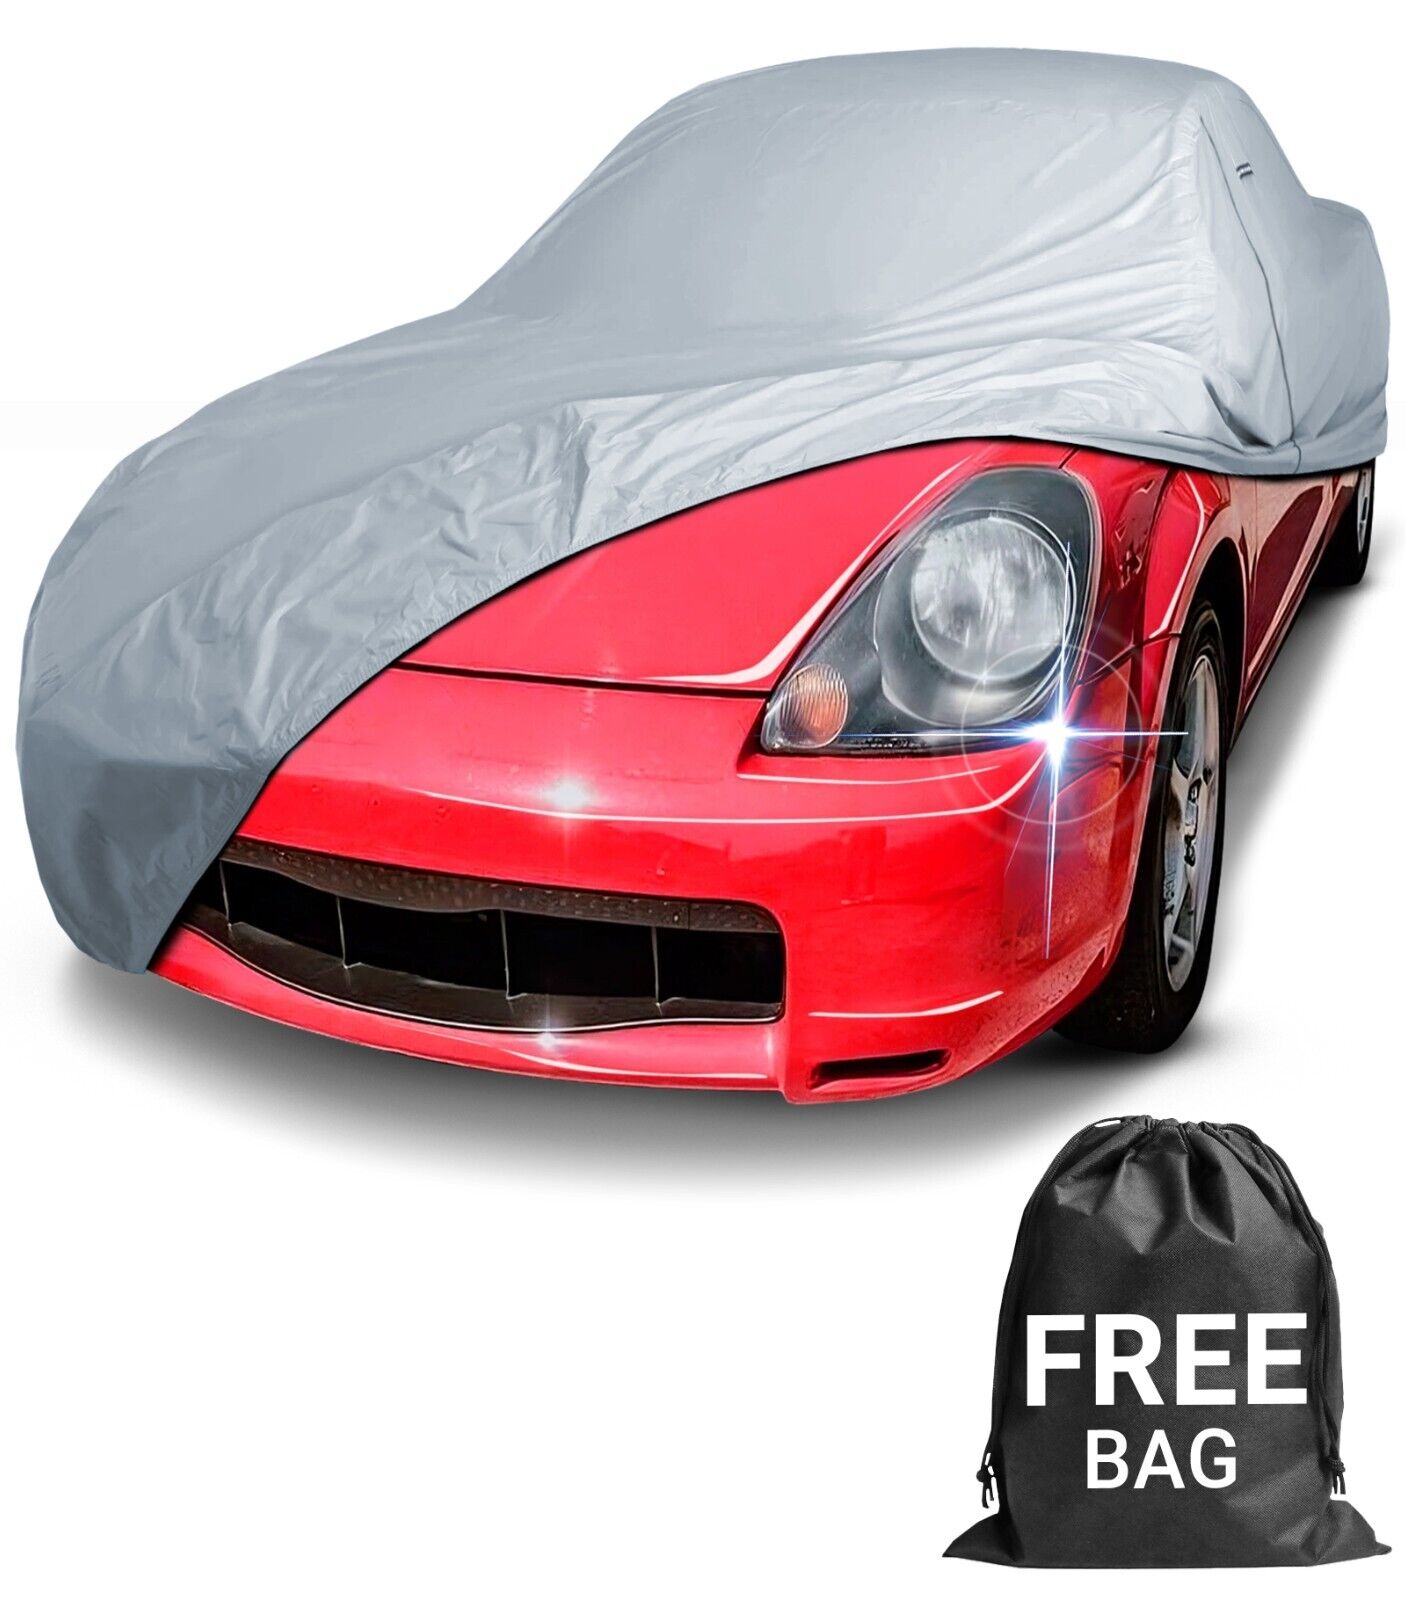 2000-2006 Toyota MR2 Spyder Custom Car Cover - All-Weather Waterproof Protection